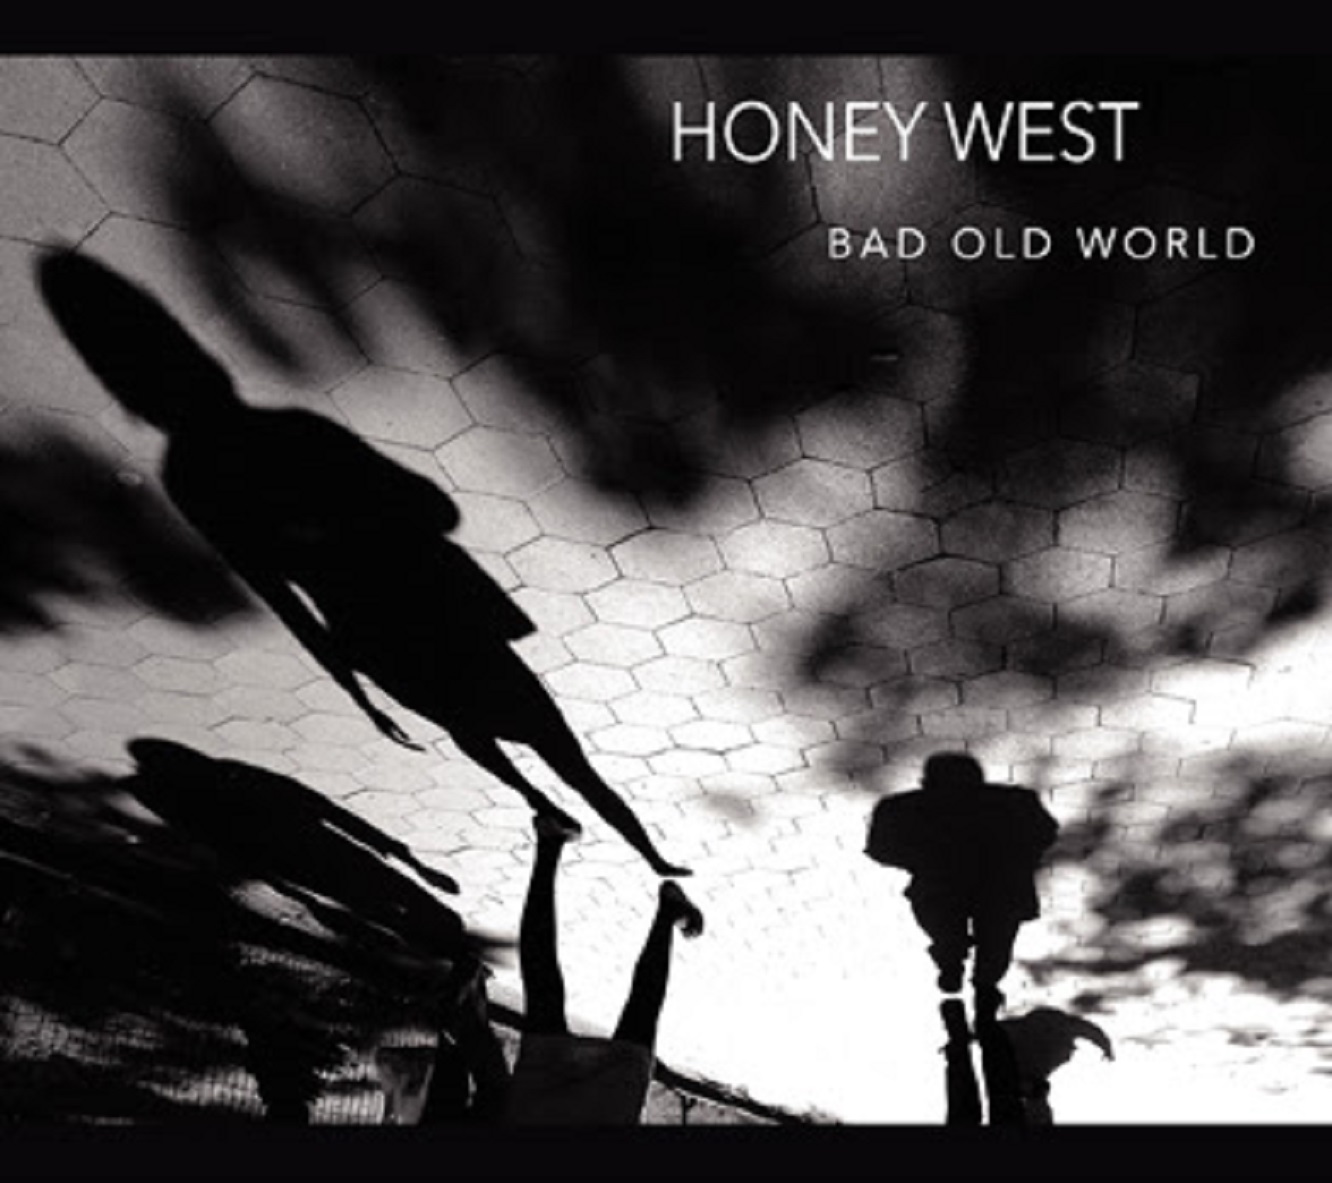 IAN McDONALD to Release Collector's Vinyl Edition of Latest Project, HONEY WEST's Acclaimed Debut "Bad Old World"